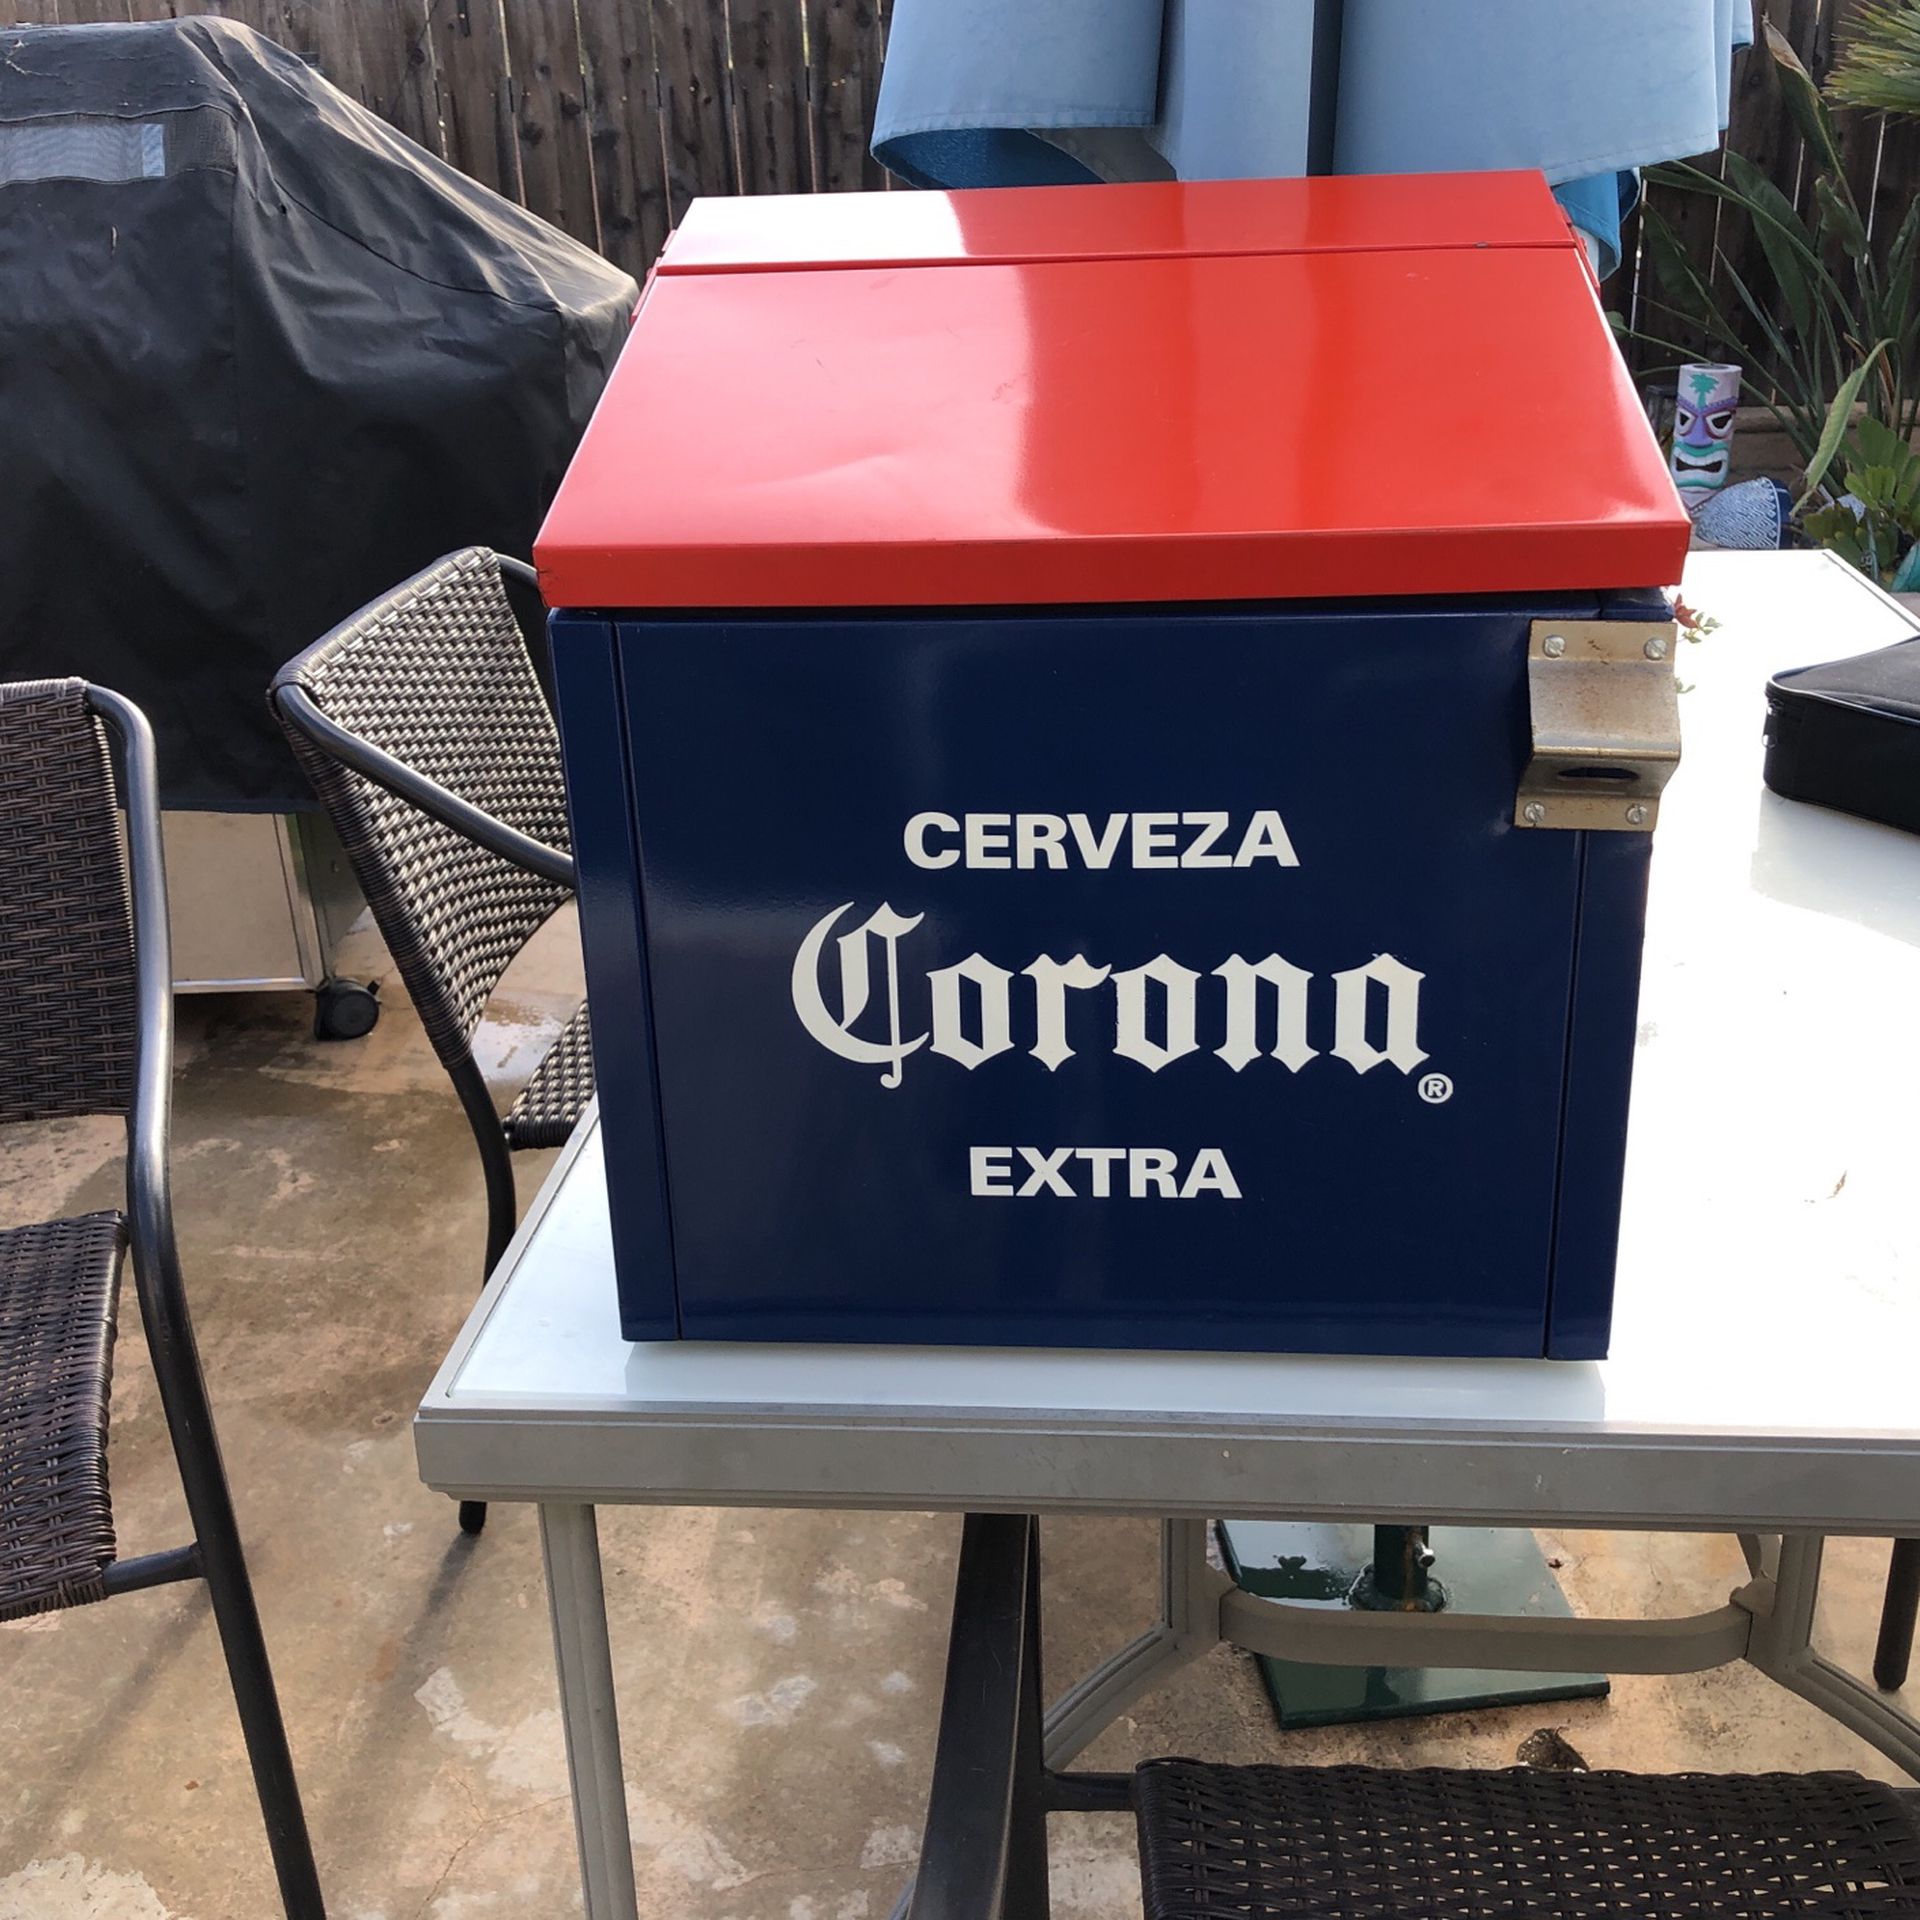 Mini insulated cooler made in Mexico came from Mazatlan very good condition asking 70